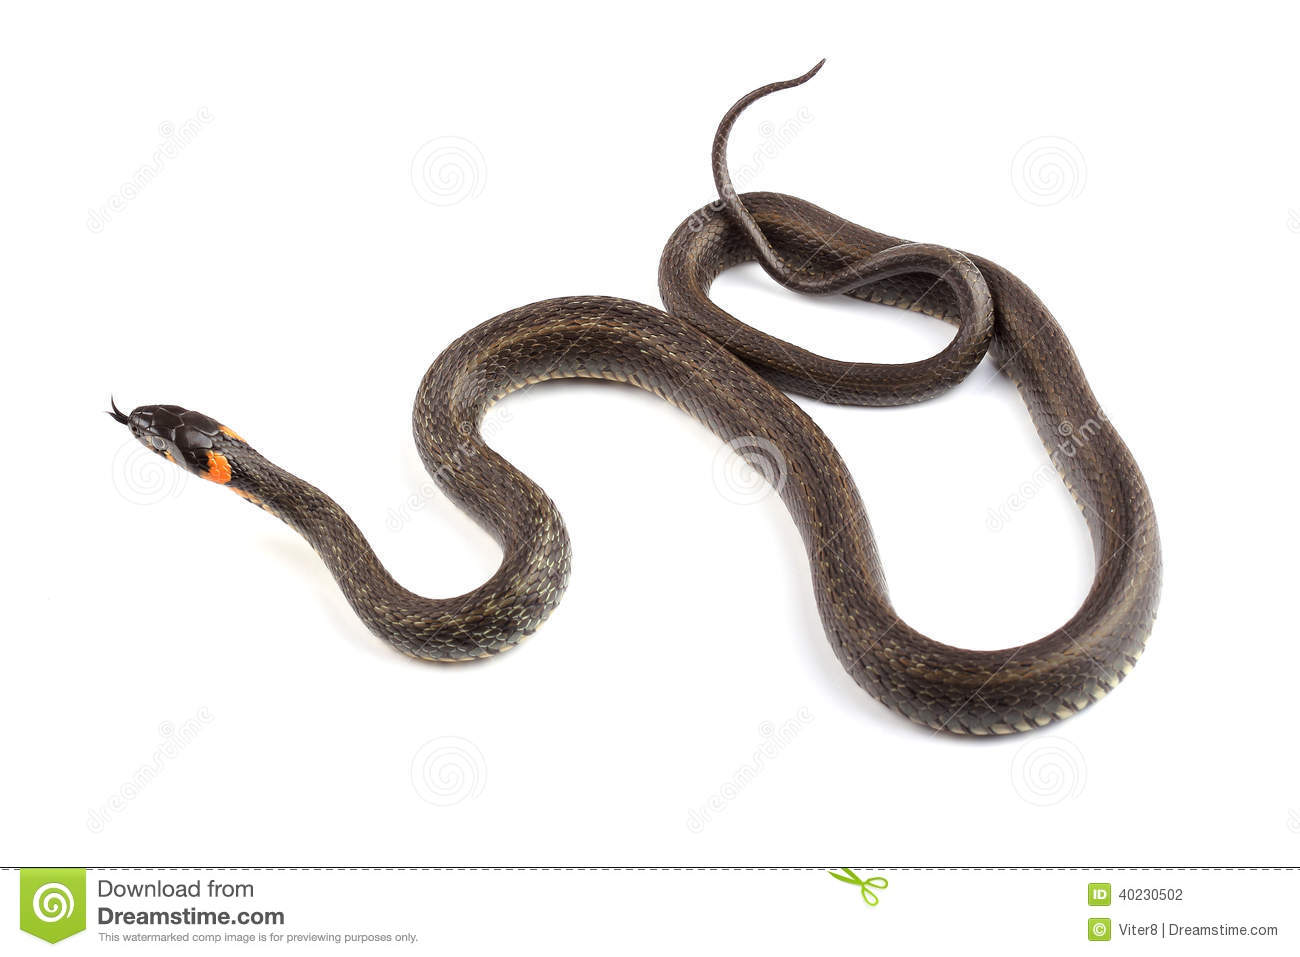 Grass Snake clipart #16, Download drawings